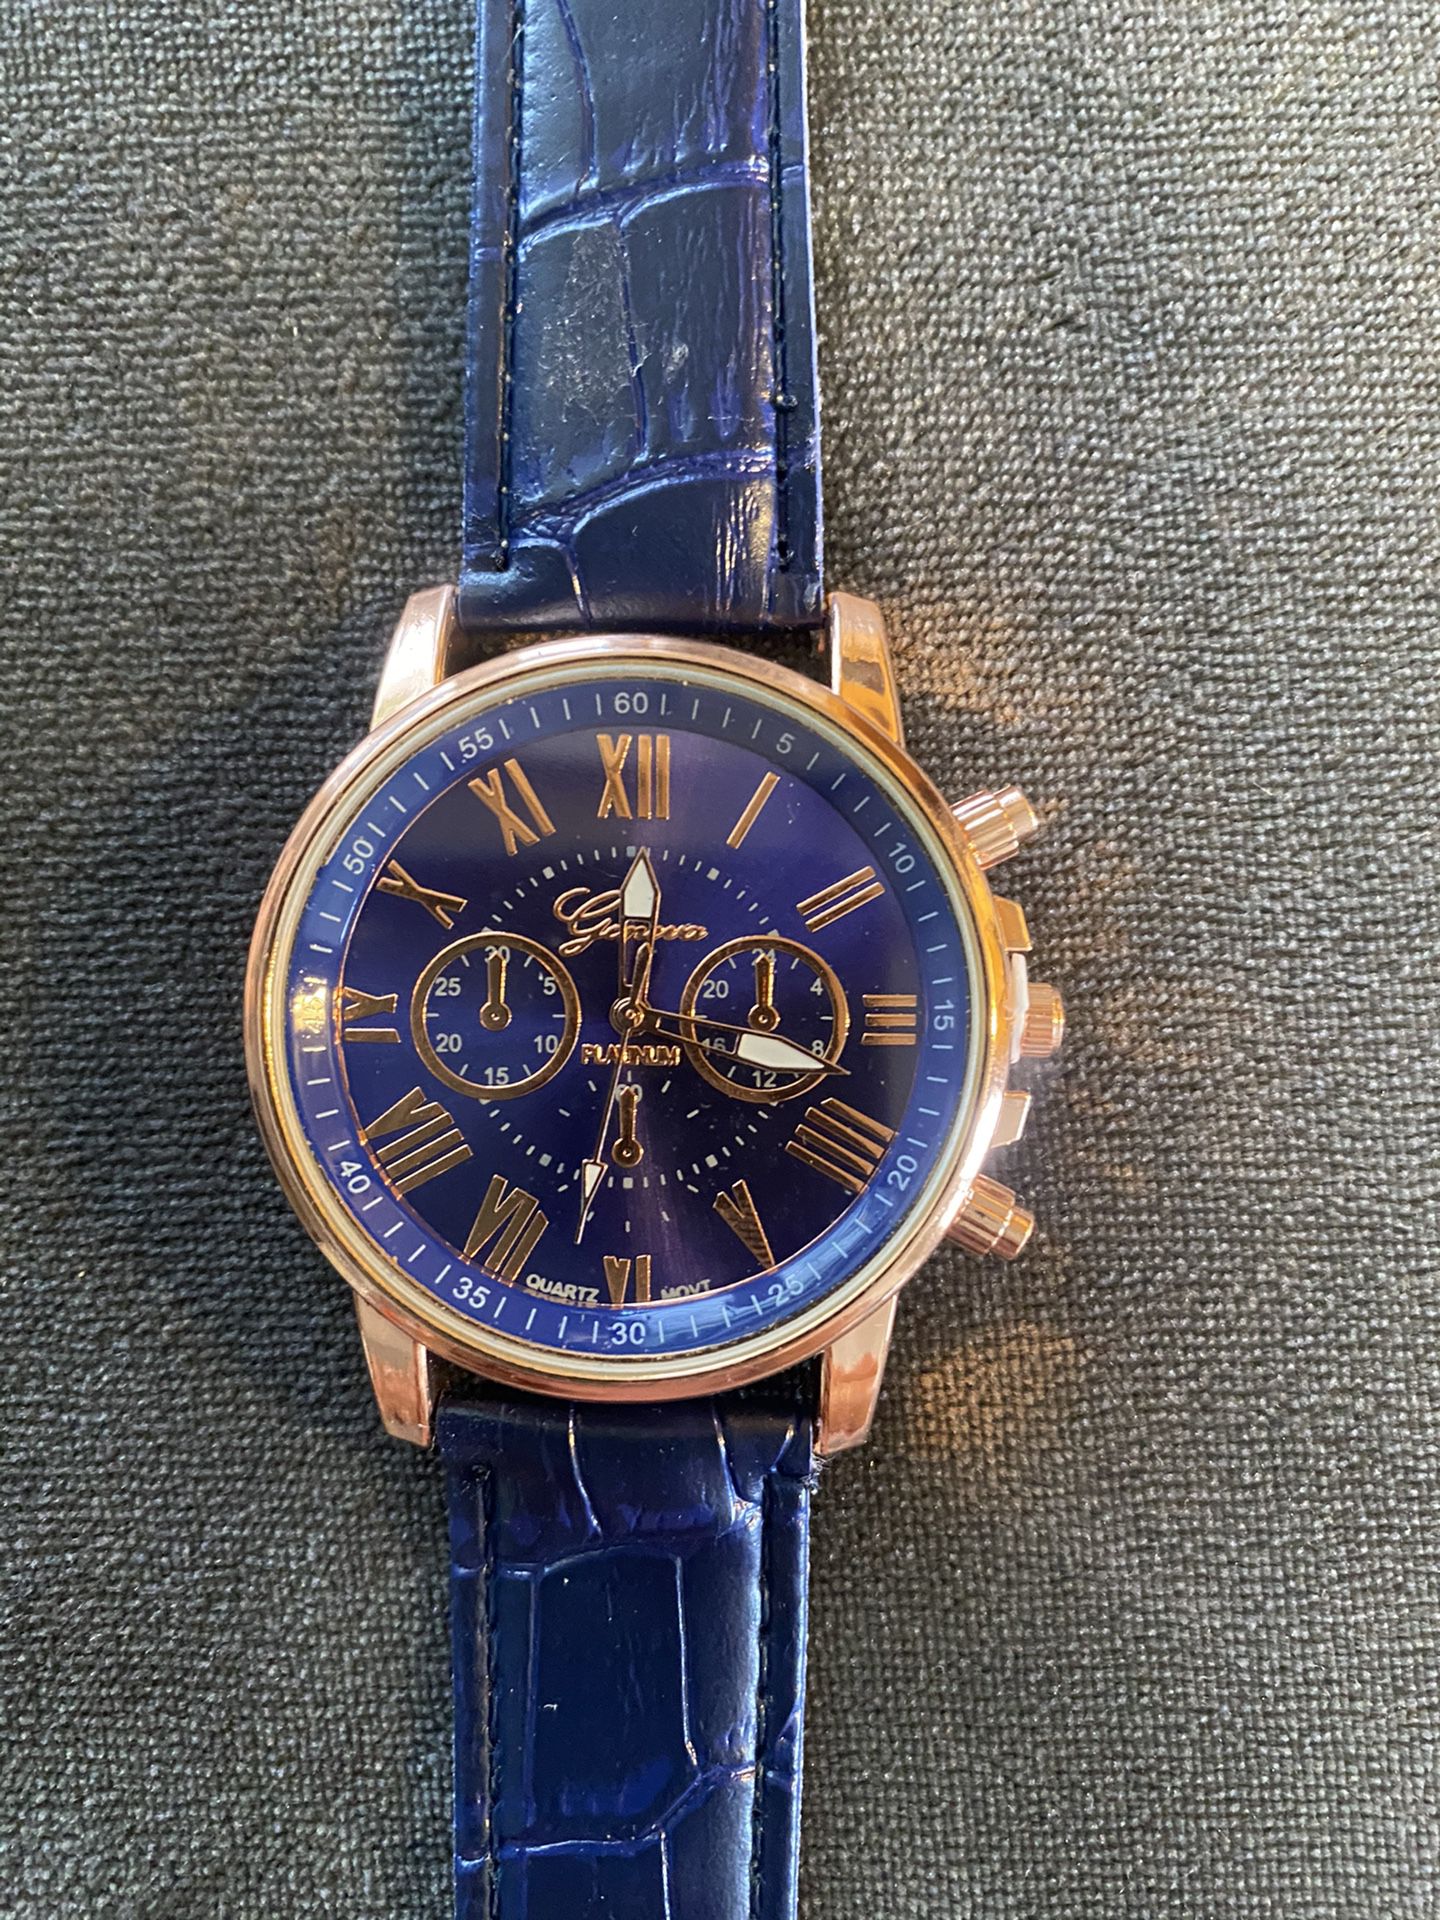 NEW: Navy blue and Rose gold watch